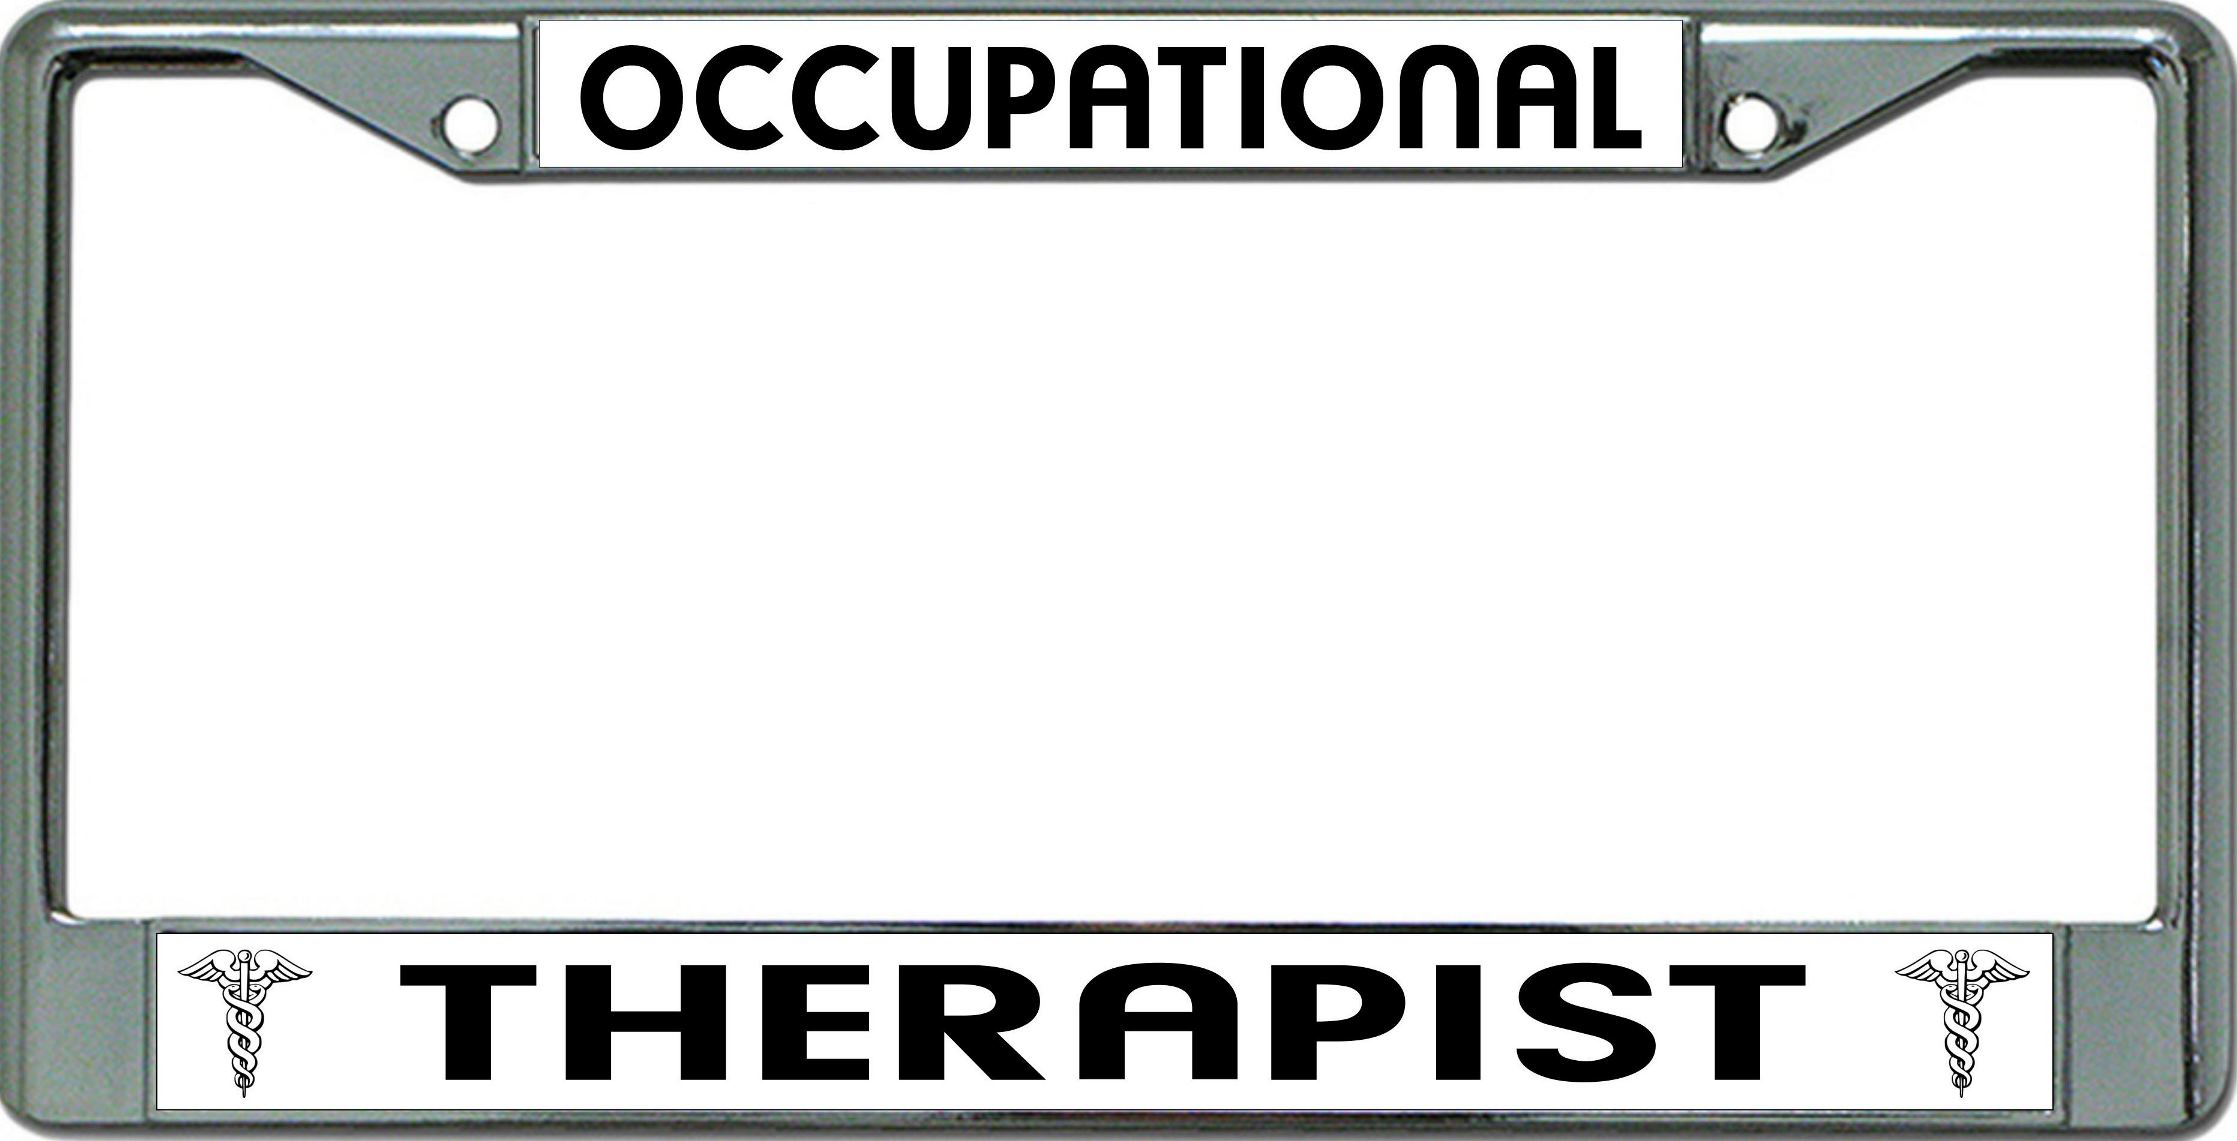 Occupational Therapist Chrome License Plate FRAME